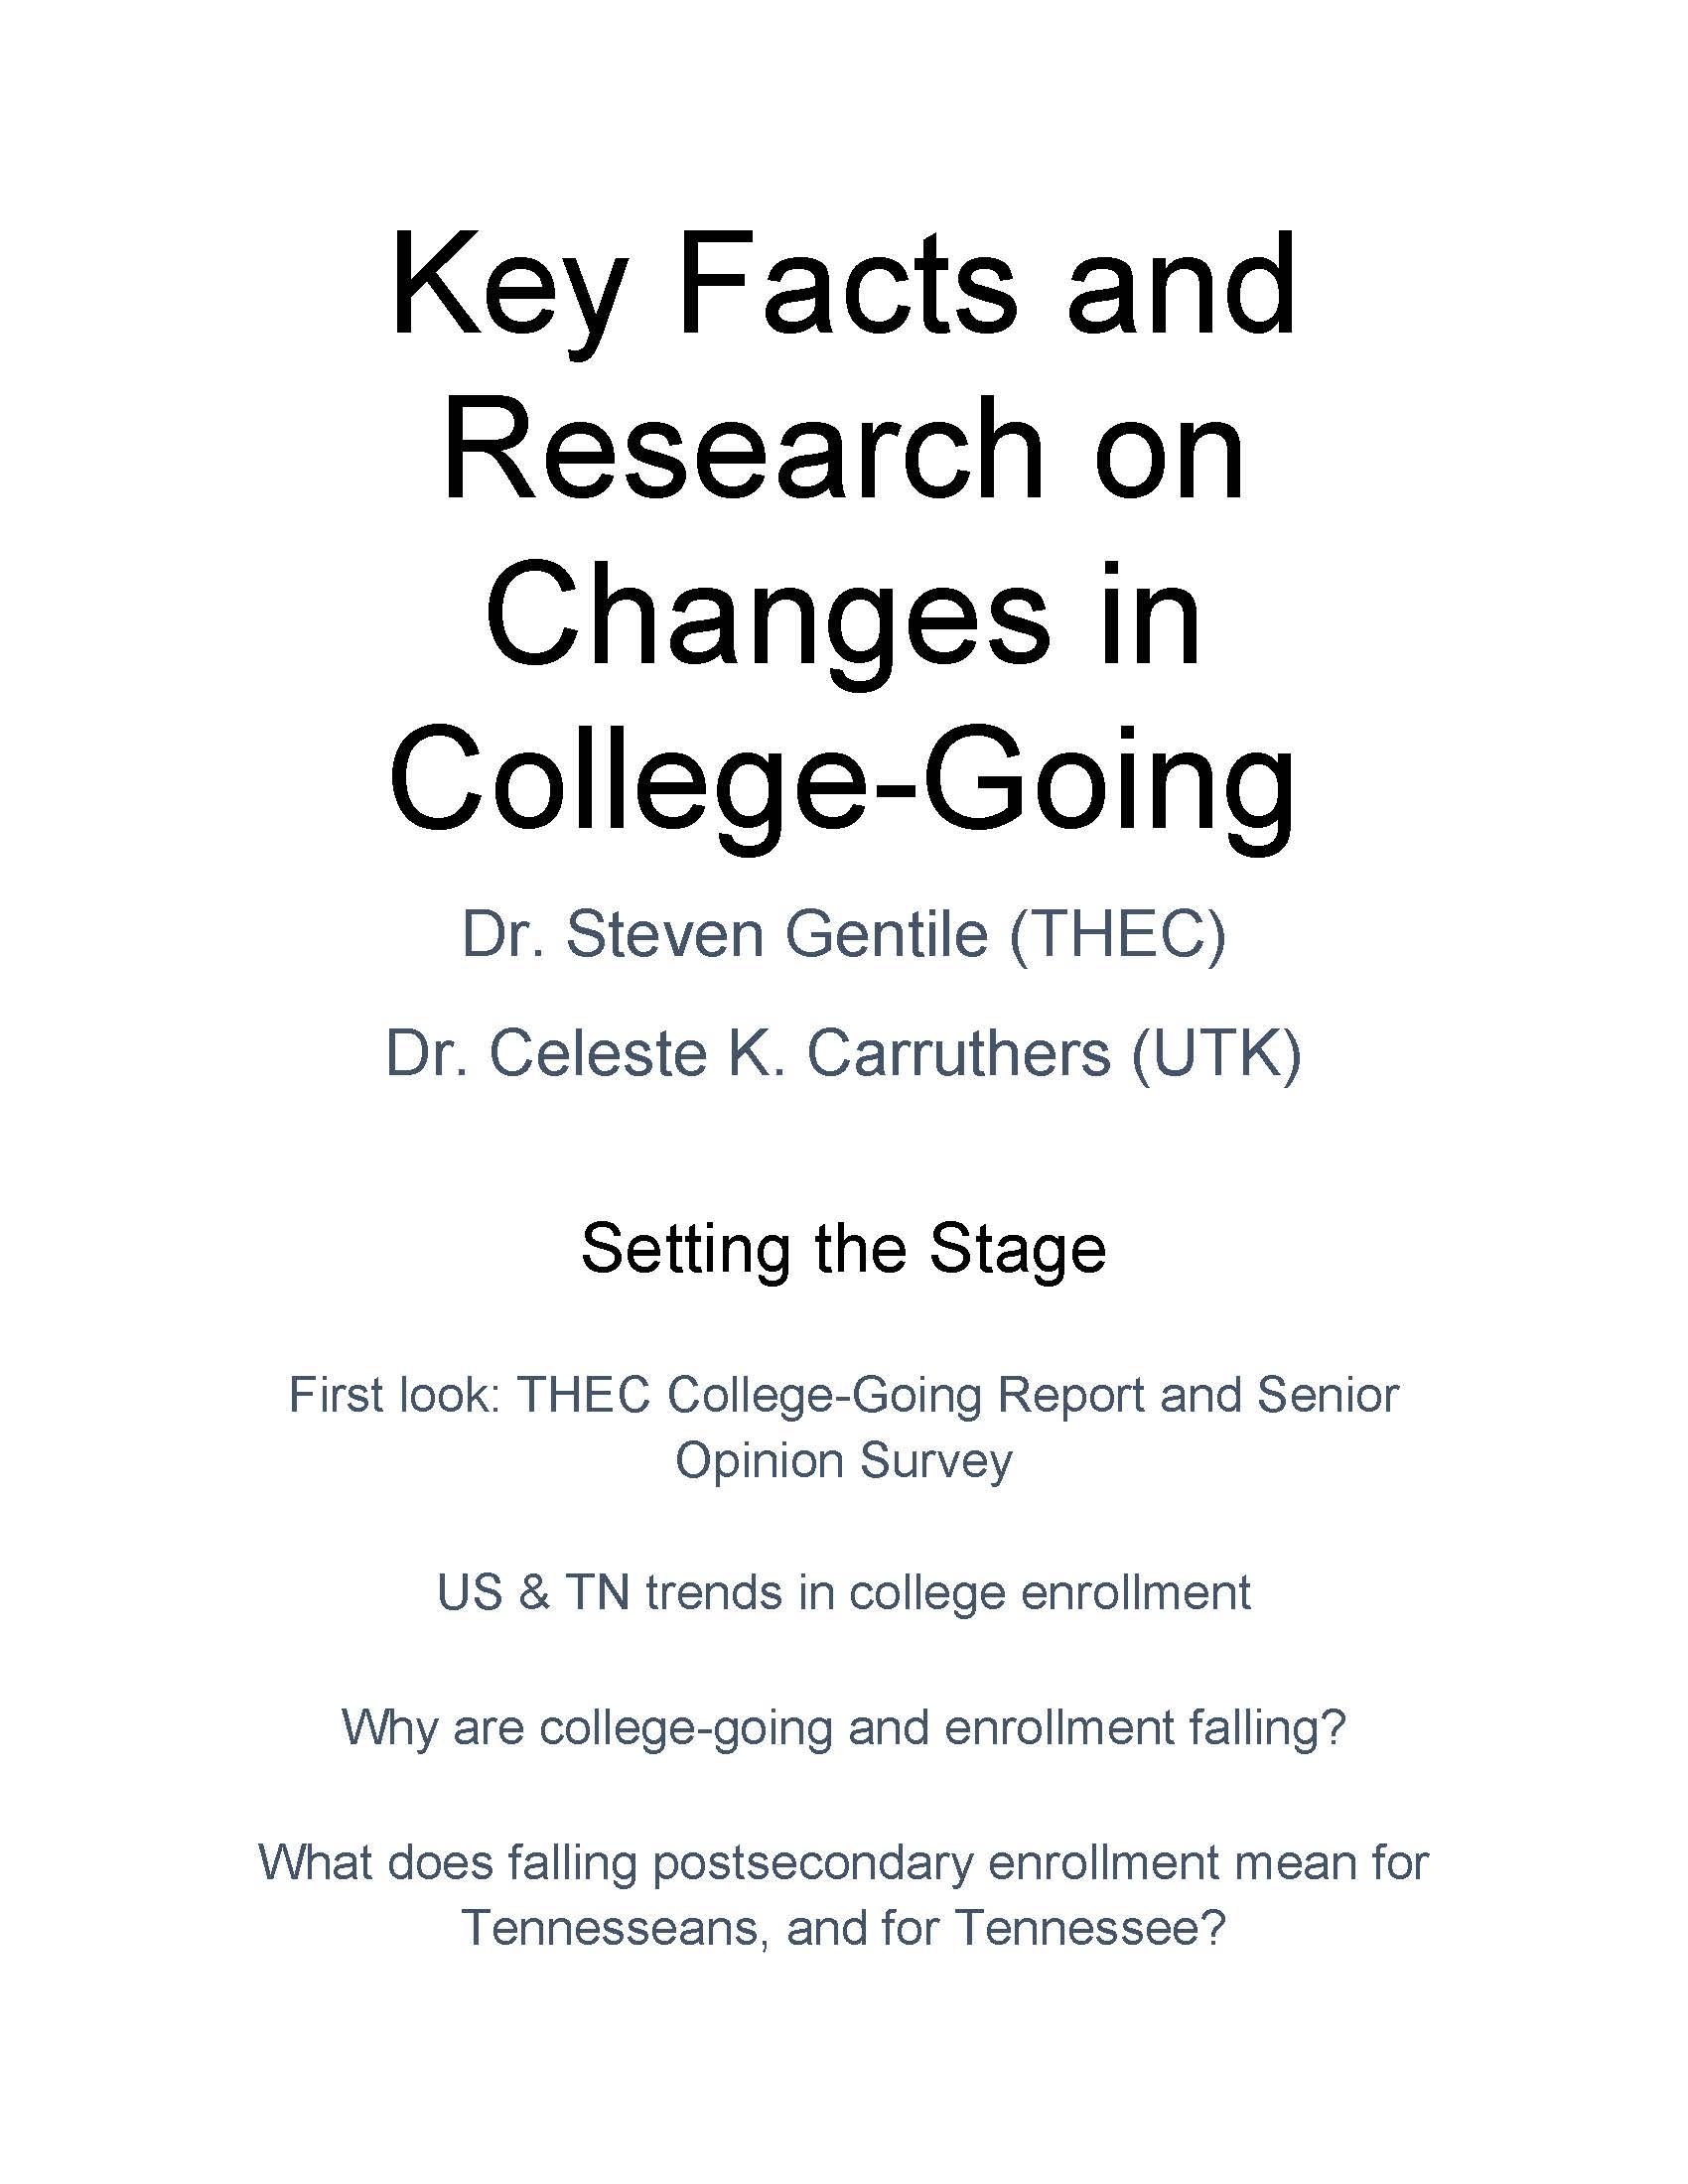 Key Facts and Research on Changes in College-Going